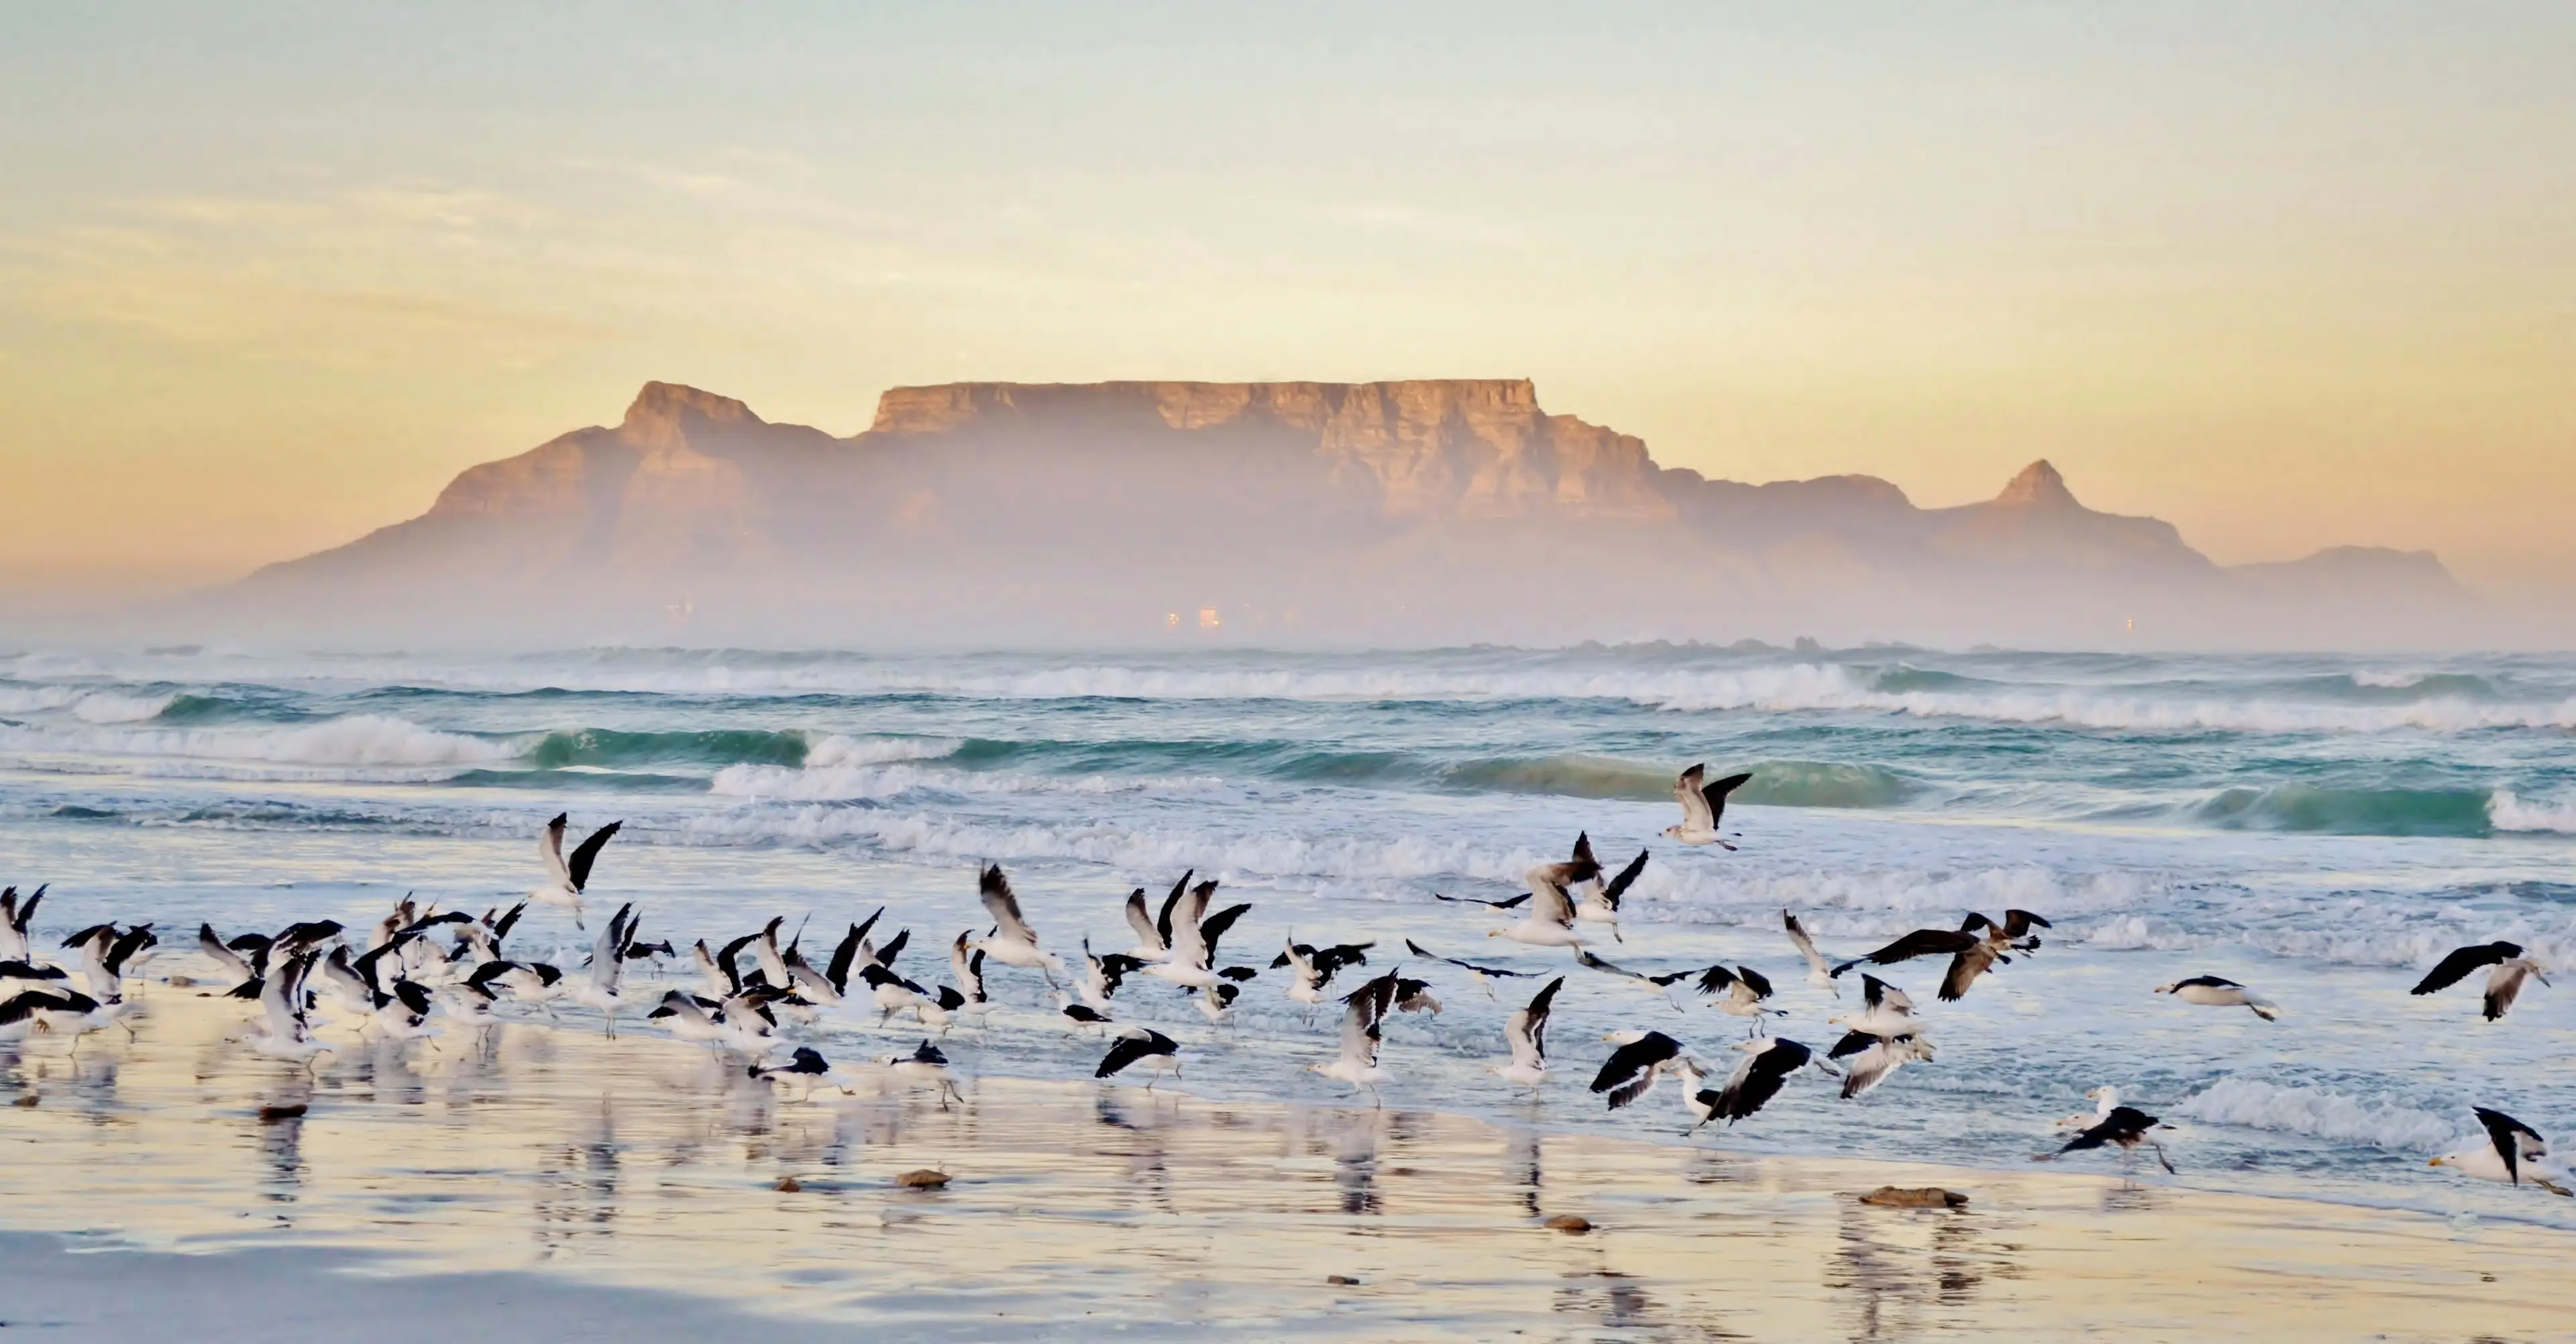 Explore Cape Town: Unforgettable 3-Day South Africa Adventure